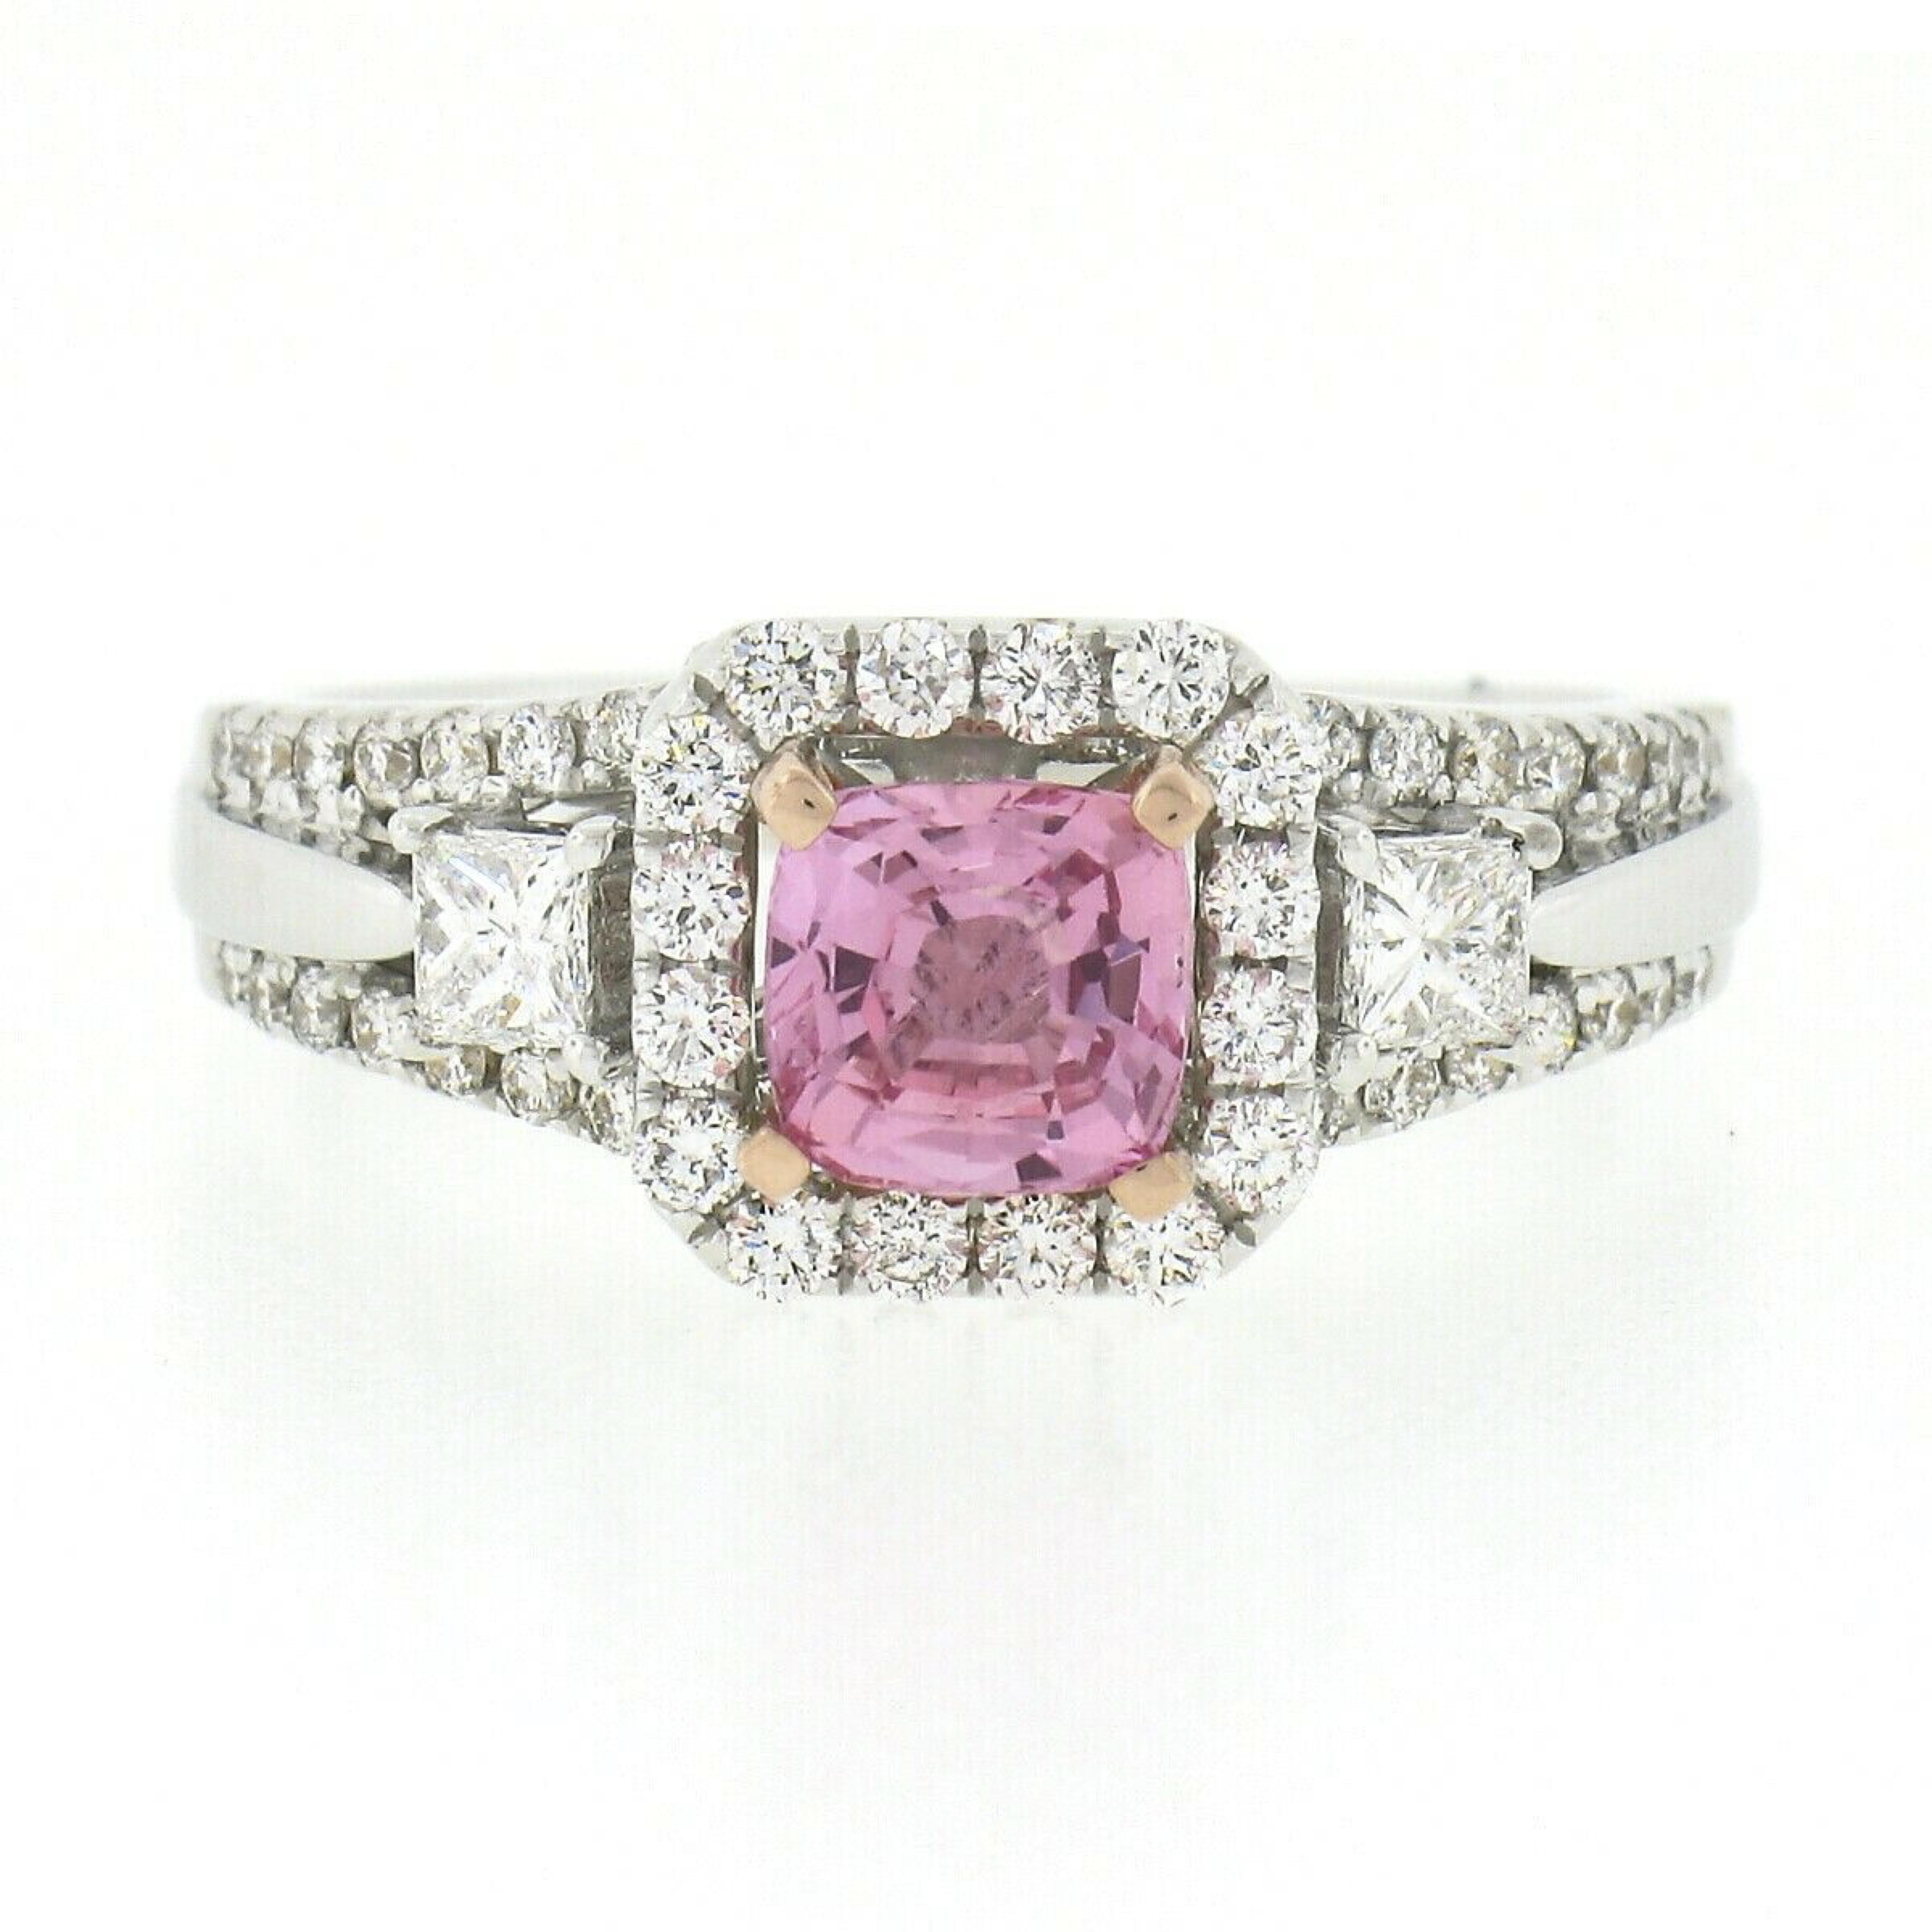 Cushion Cut New 14k White Gold 1.55ctw No Heat Pink Cushion Sapphire Diamond Engagement Ring For Sale